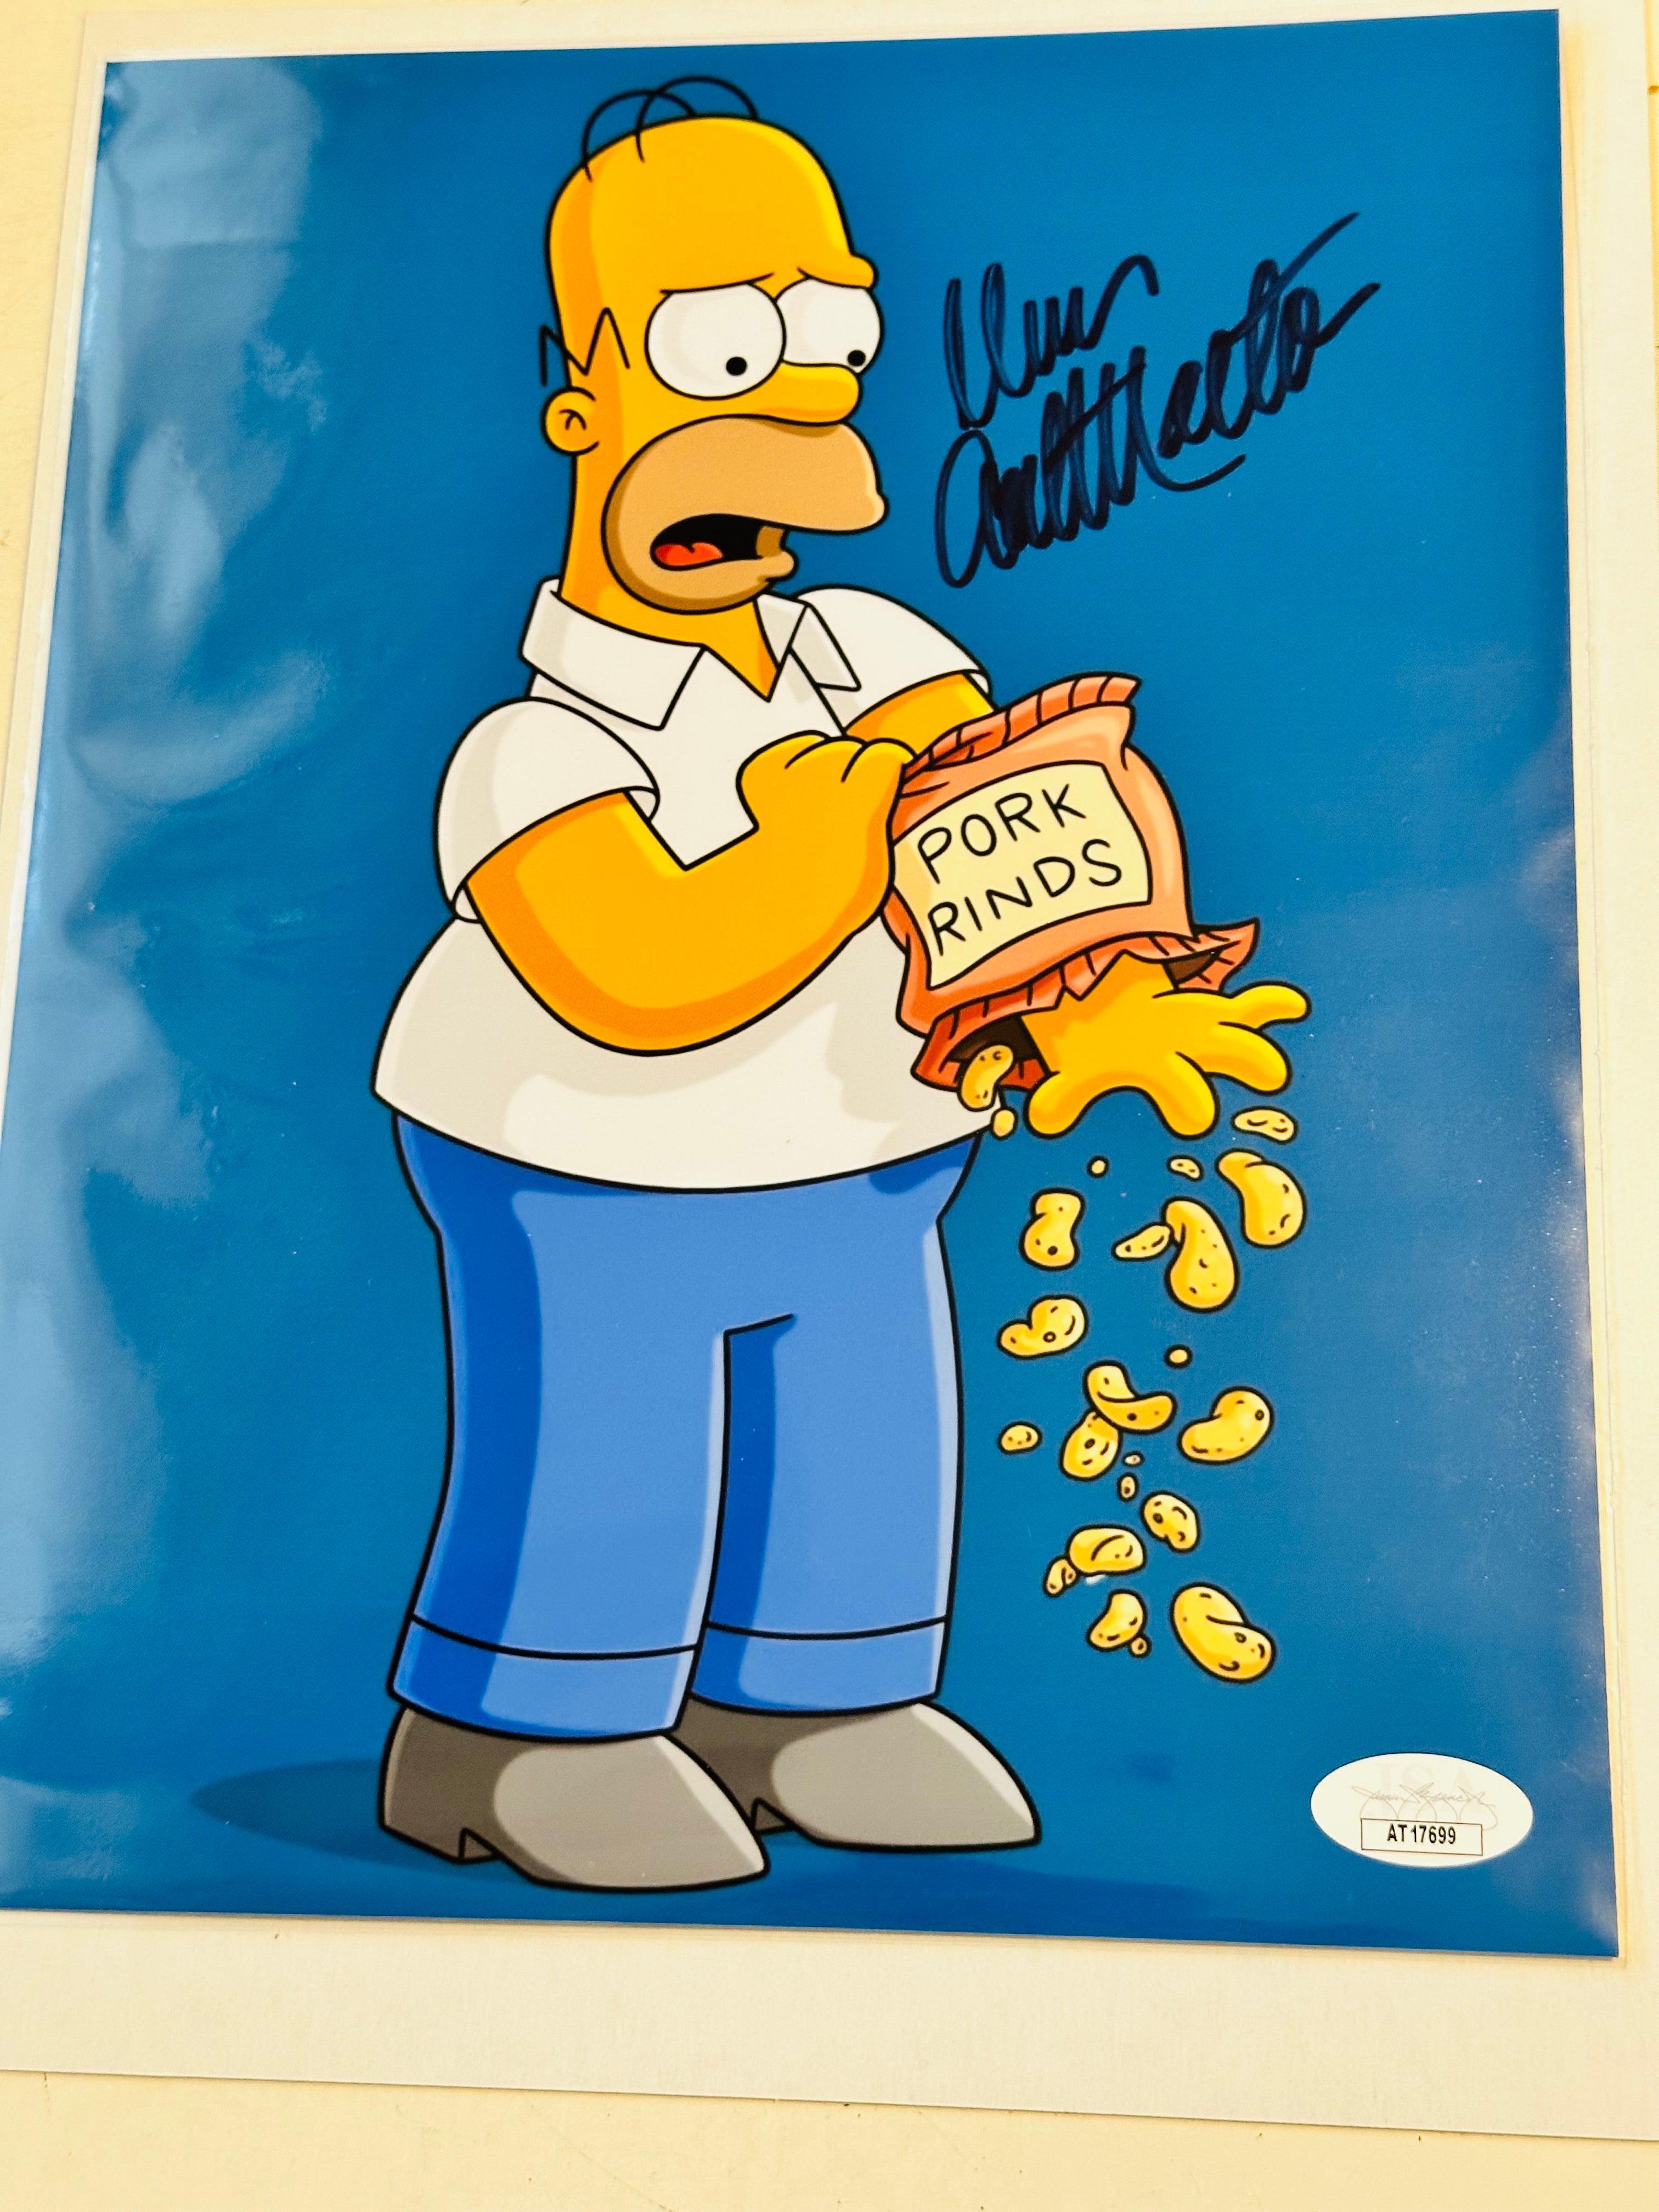 The Simpsons Dan Castellaneta  voice of Homer Simpson autographed 8x10 photo certified by JSA